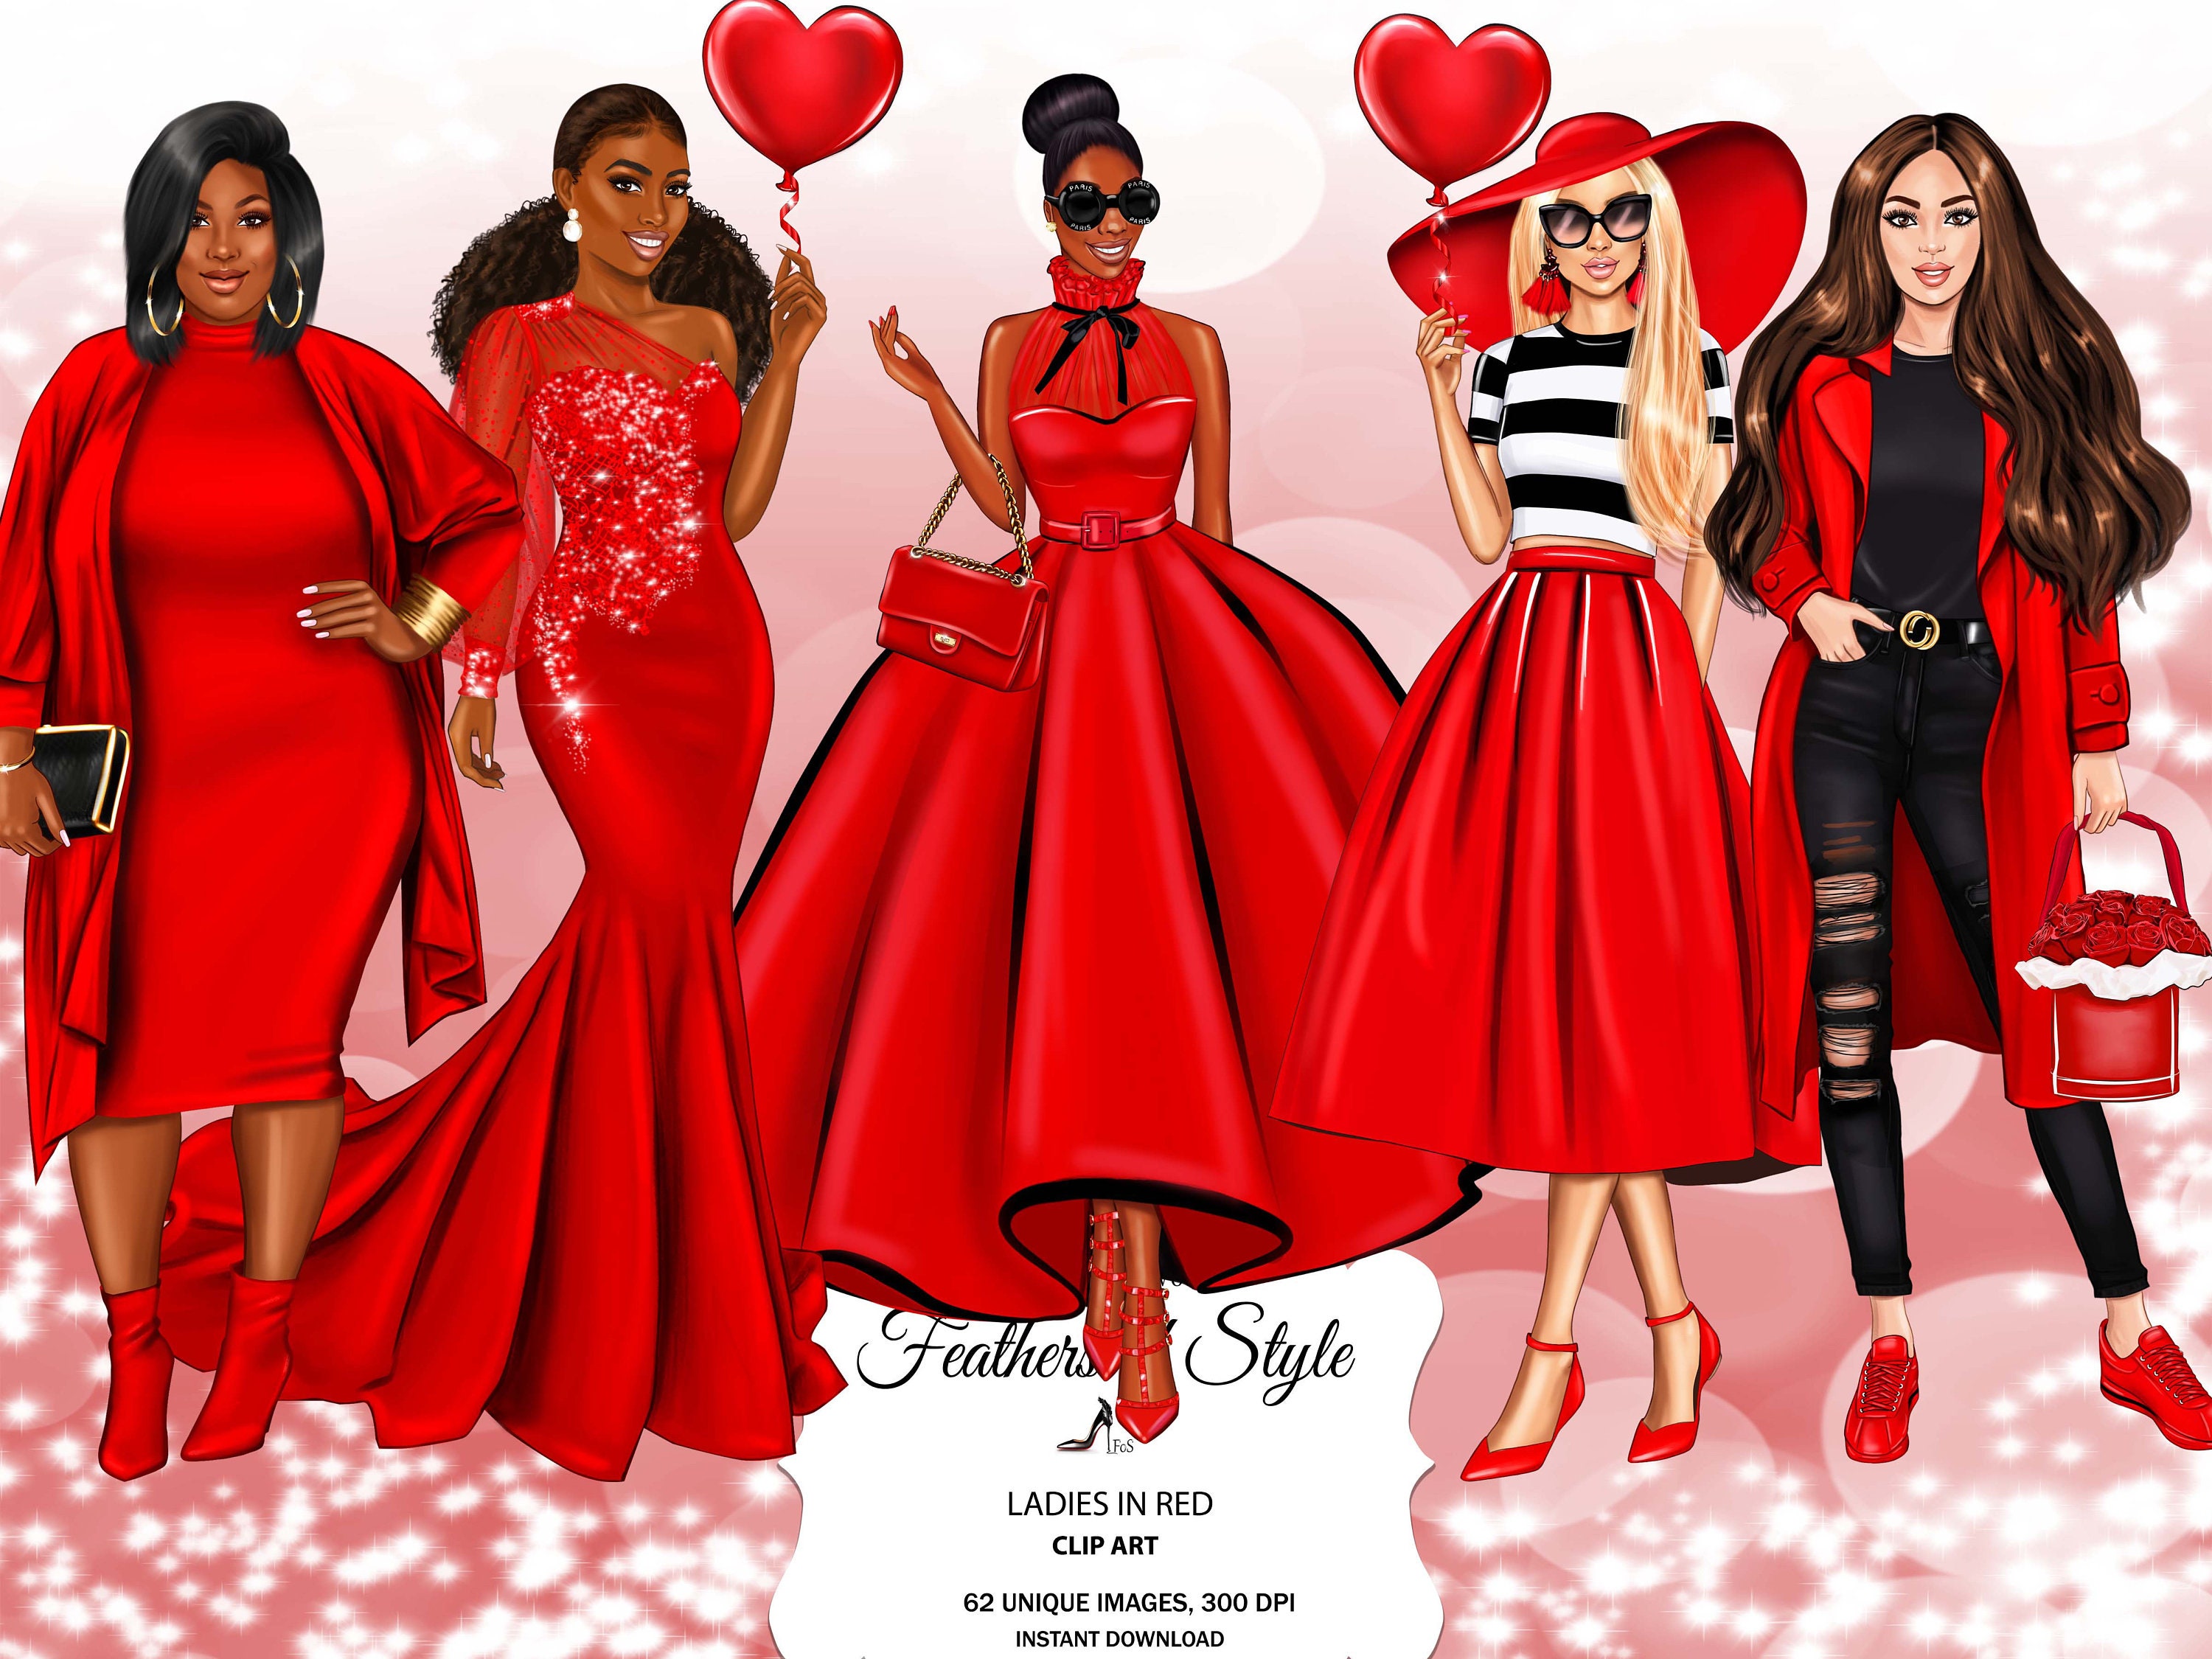 caldera Afirmar Increíble Fashion Girls Clipart the Lady in Red Clipart Women in Red - Etsy